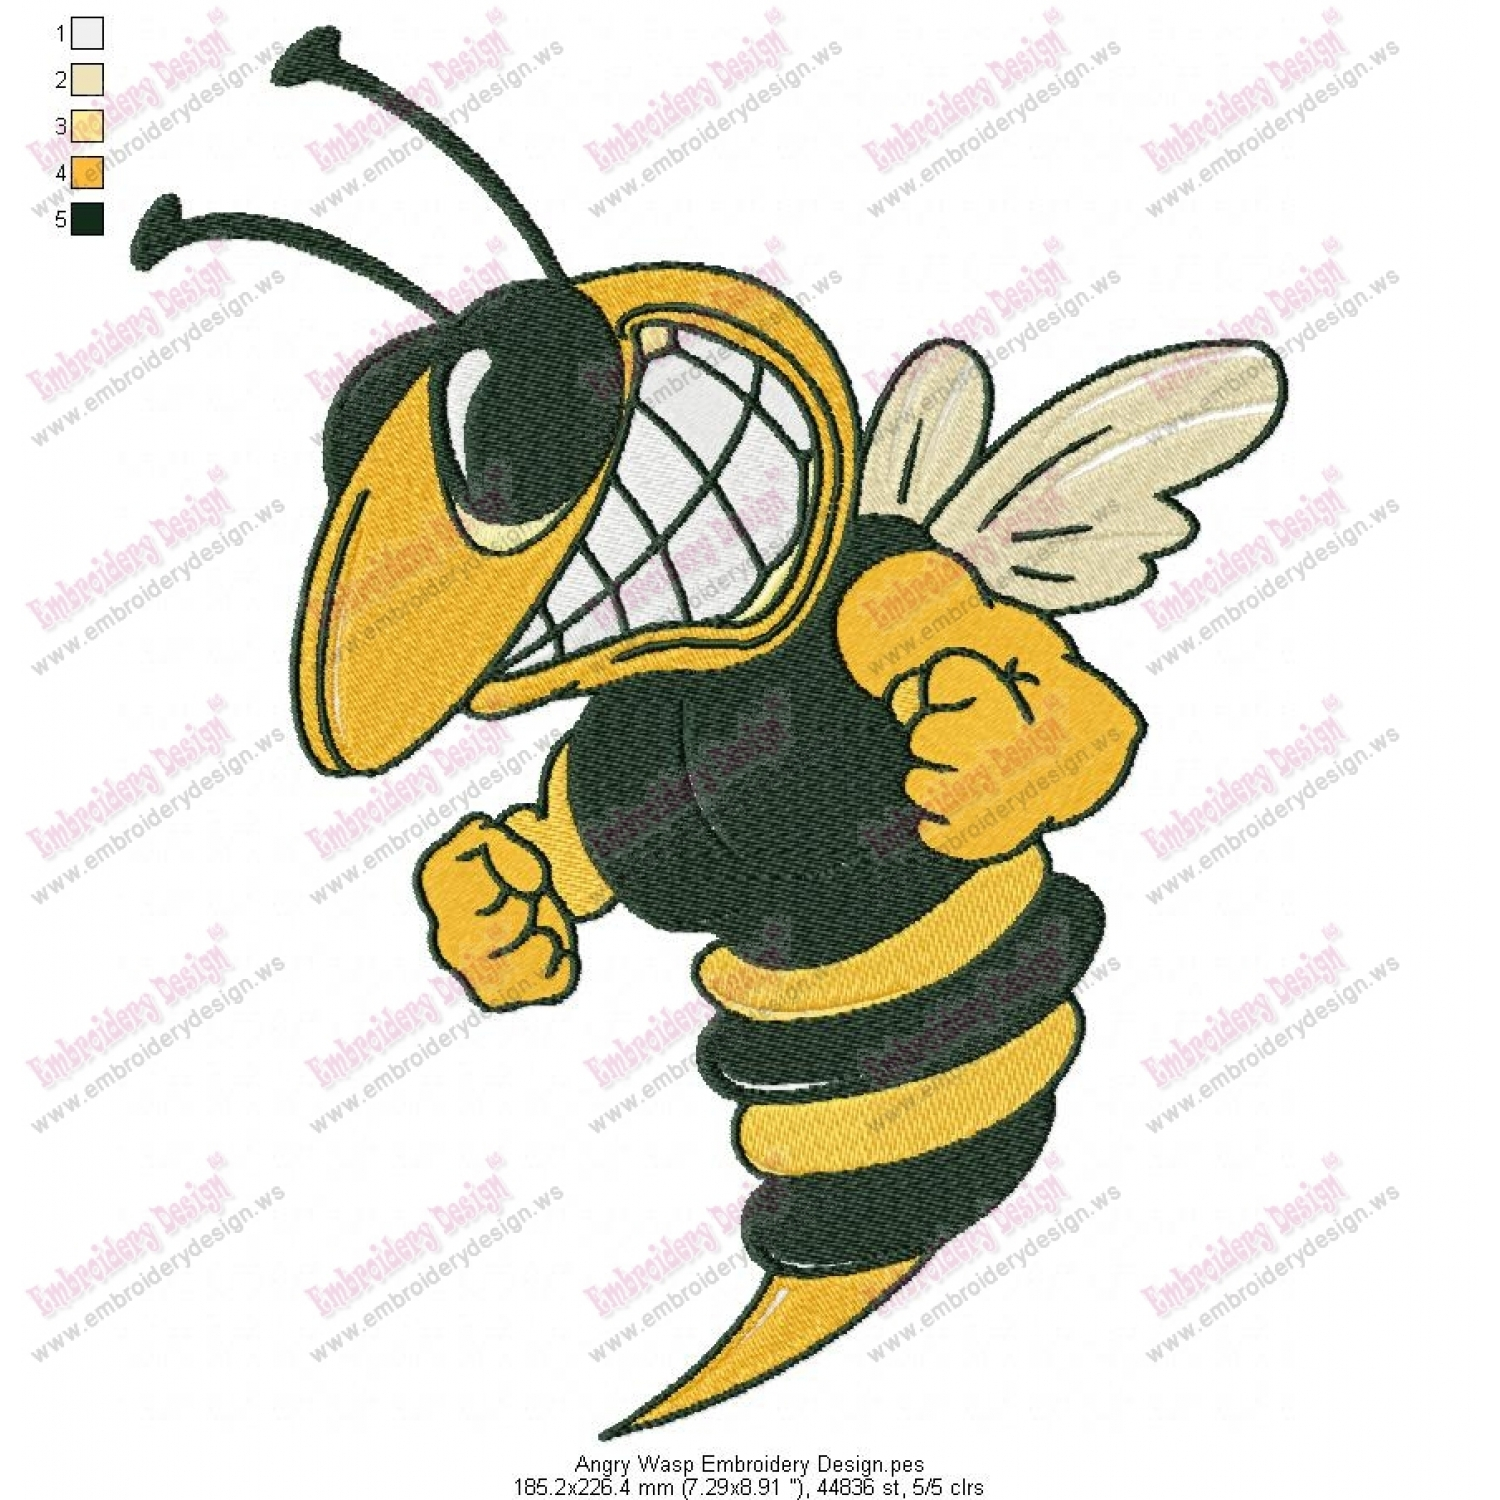 Bumble Bee Embroidery Pattern Bee And Wasp Embroidery